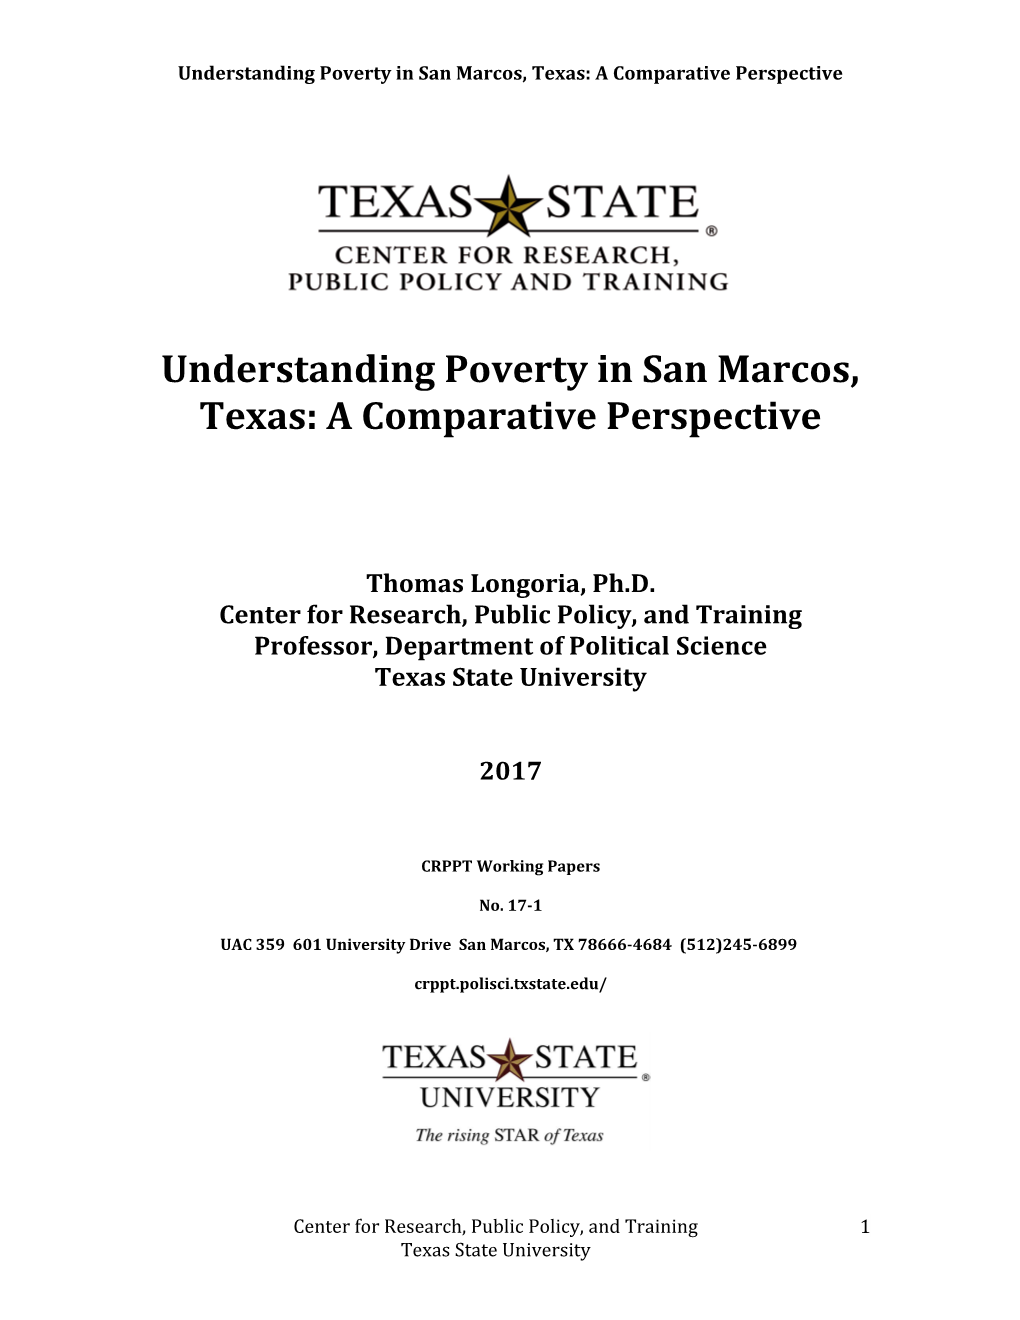 Understanding Poverty in San Marcos, Texas: a Comparative Perspective